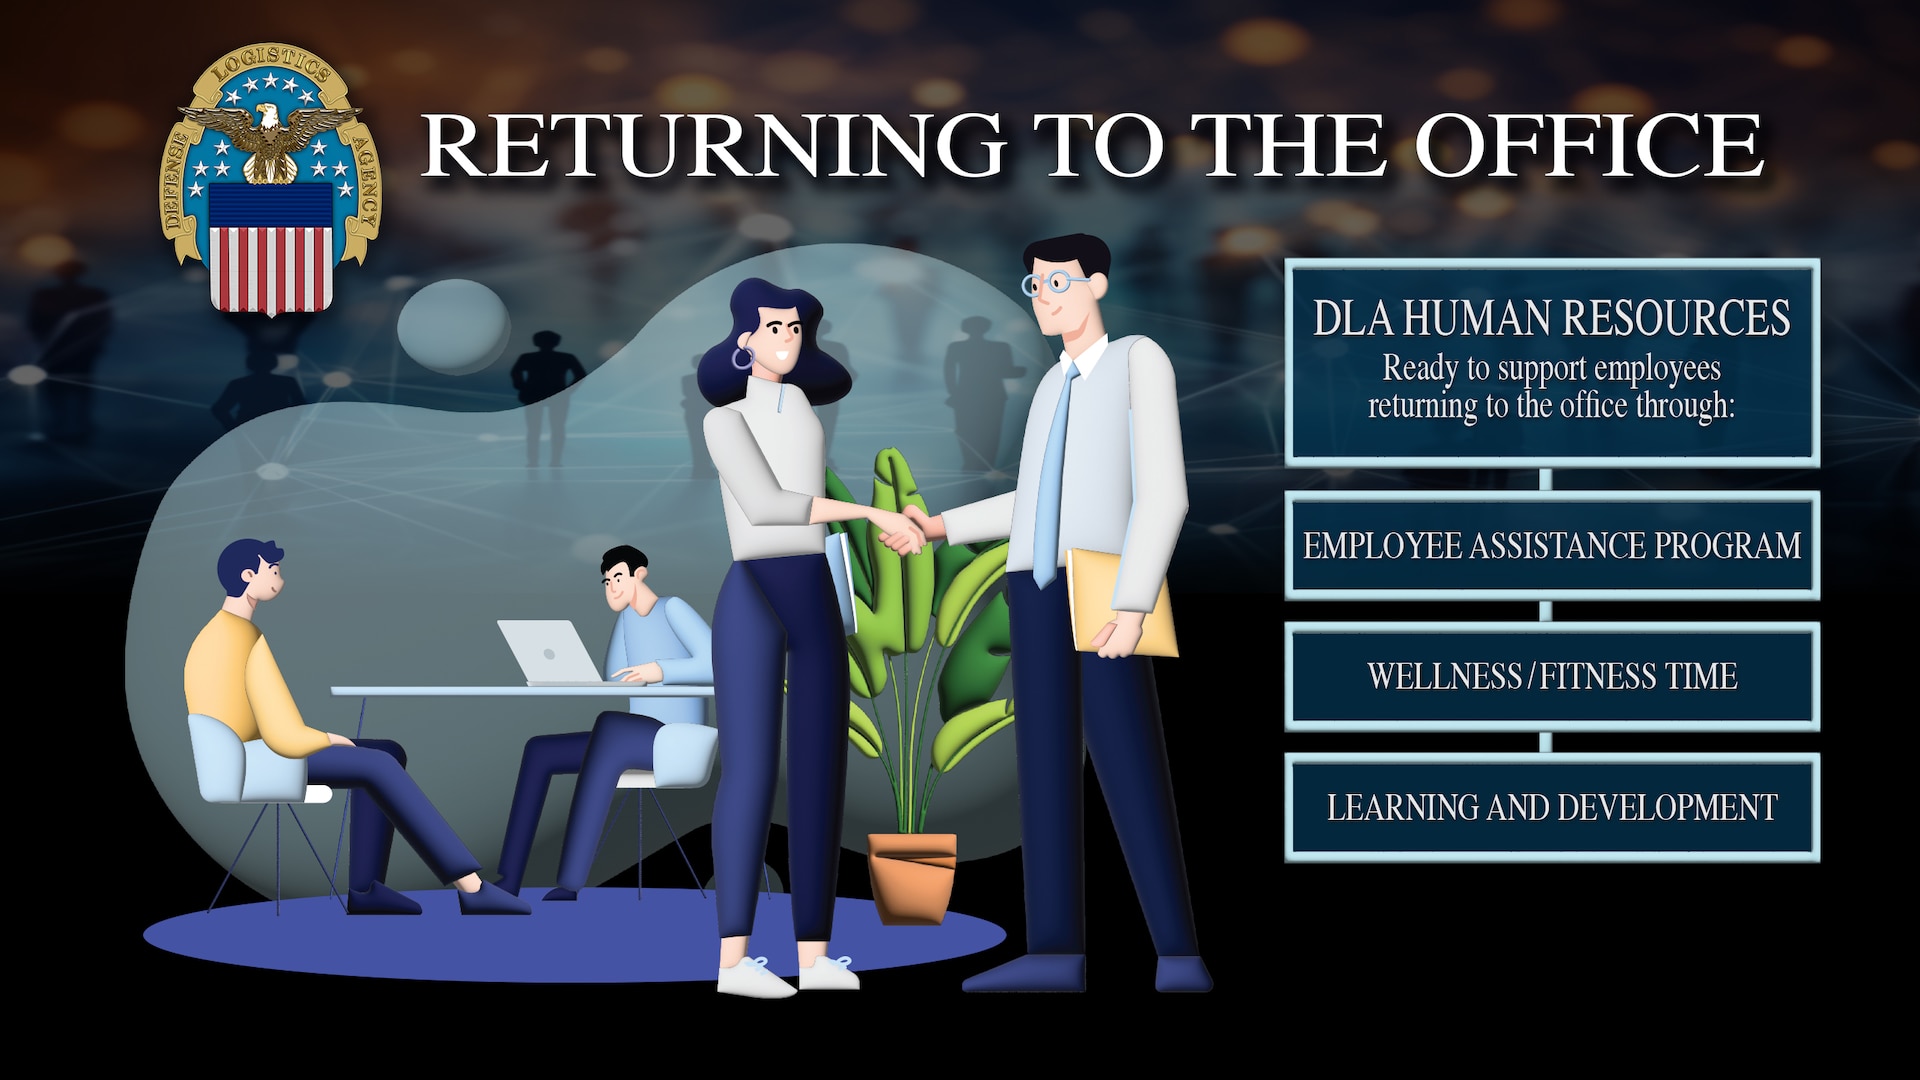 A graphic depicting two people shaking hands with the headline "Returning to the office" with boxes of text on the right hand side.